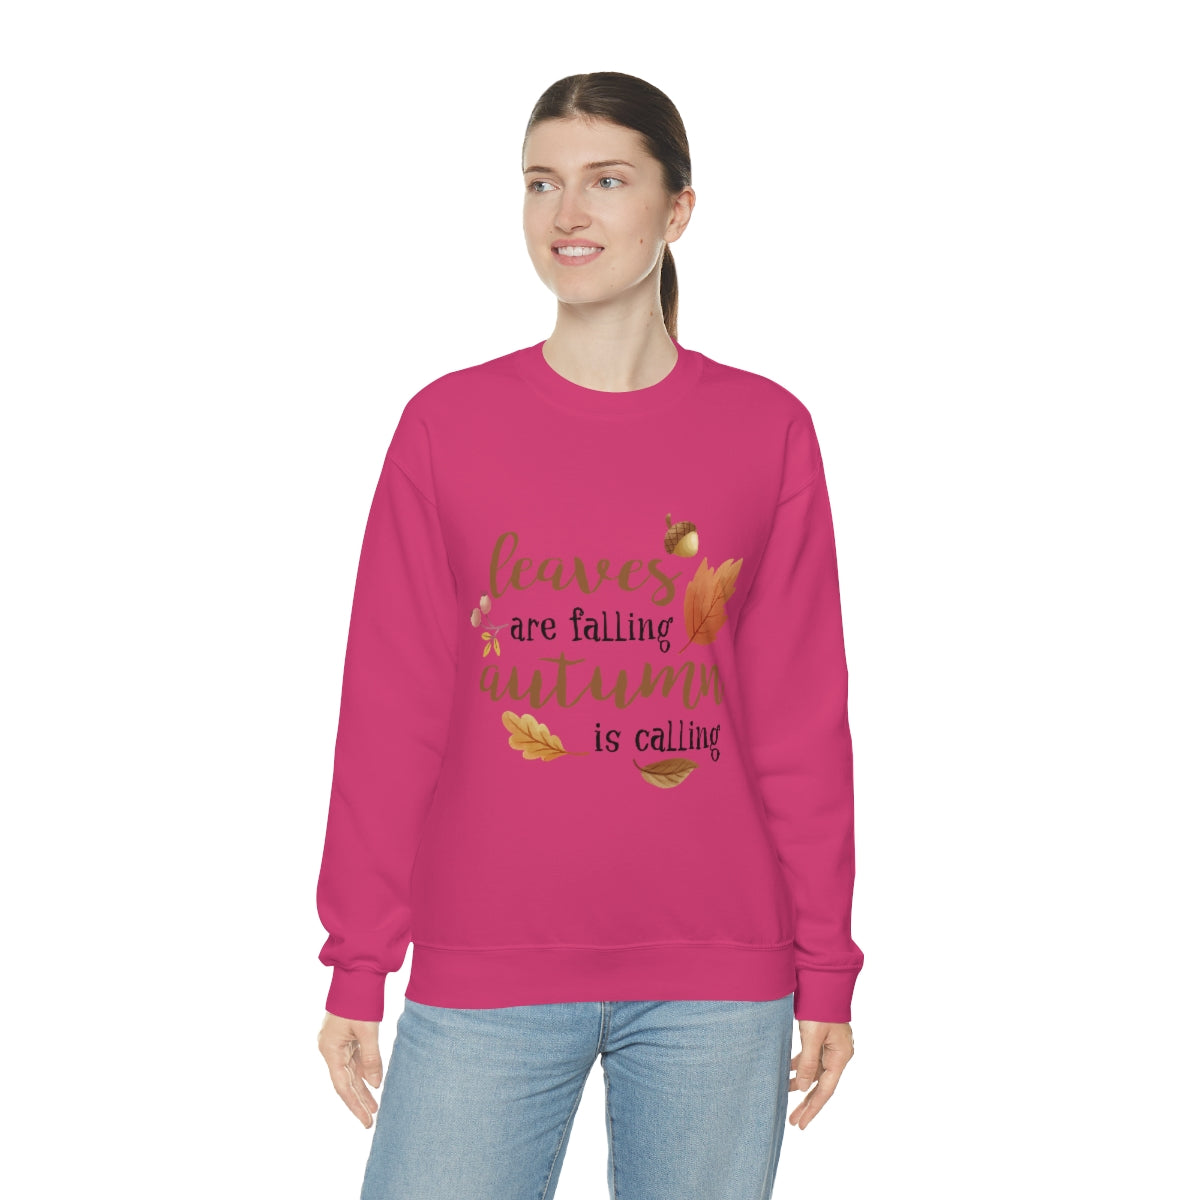 FALL SWEATSHIRT, Leaves are Falling Autumn is Calling, Autumn Seweatshirt, Unisex Fall Crewneck Sweatshirt, Halloween Party Shirt